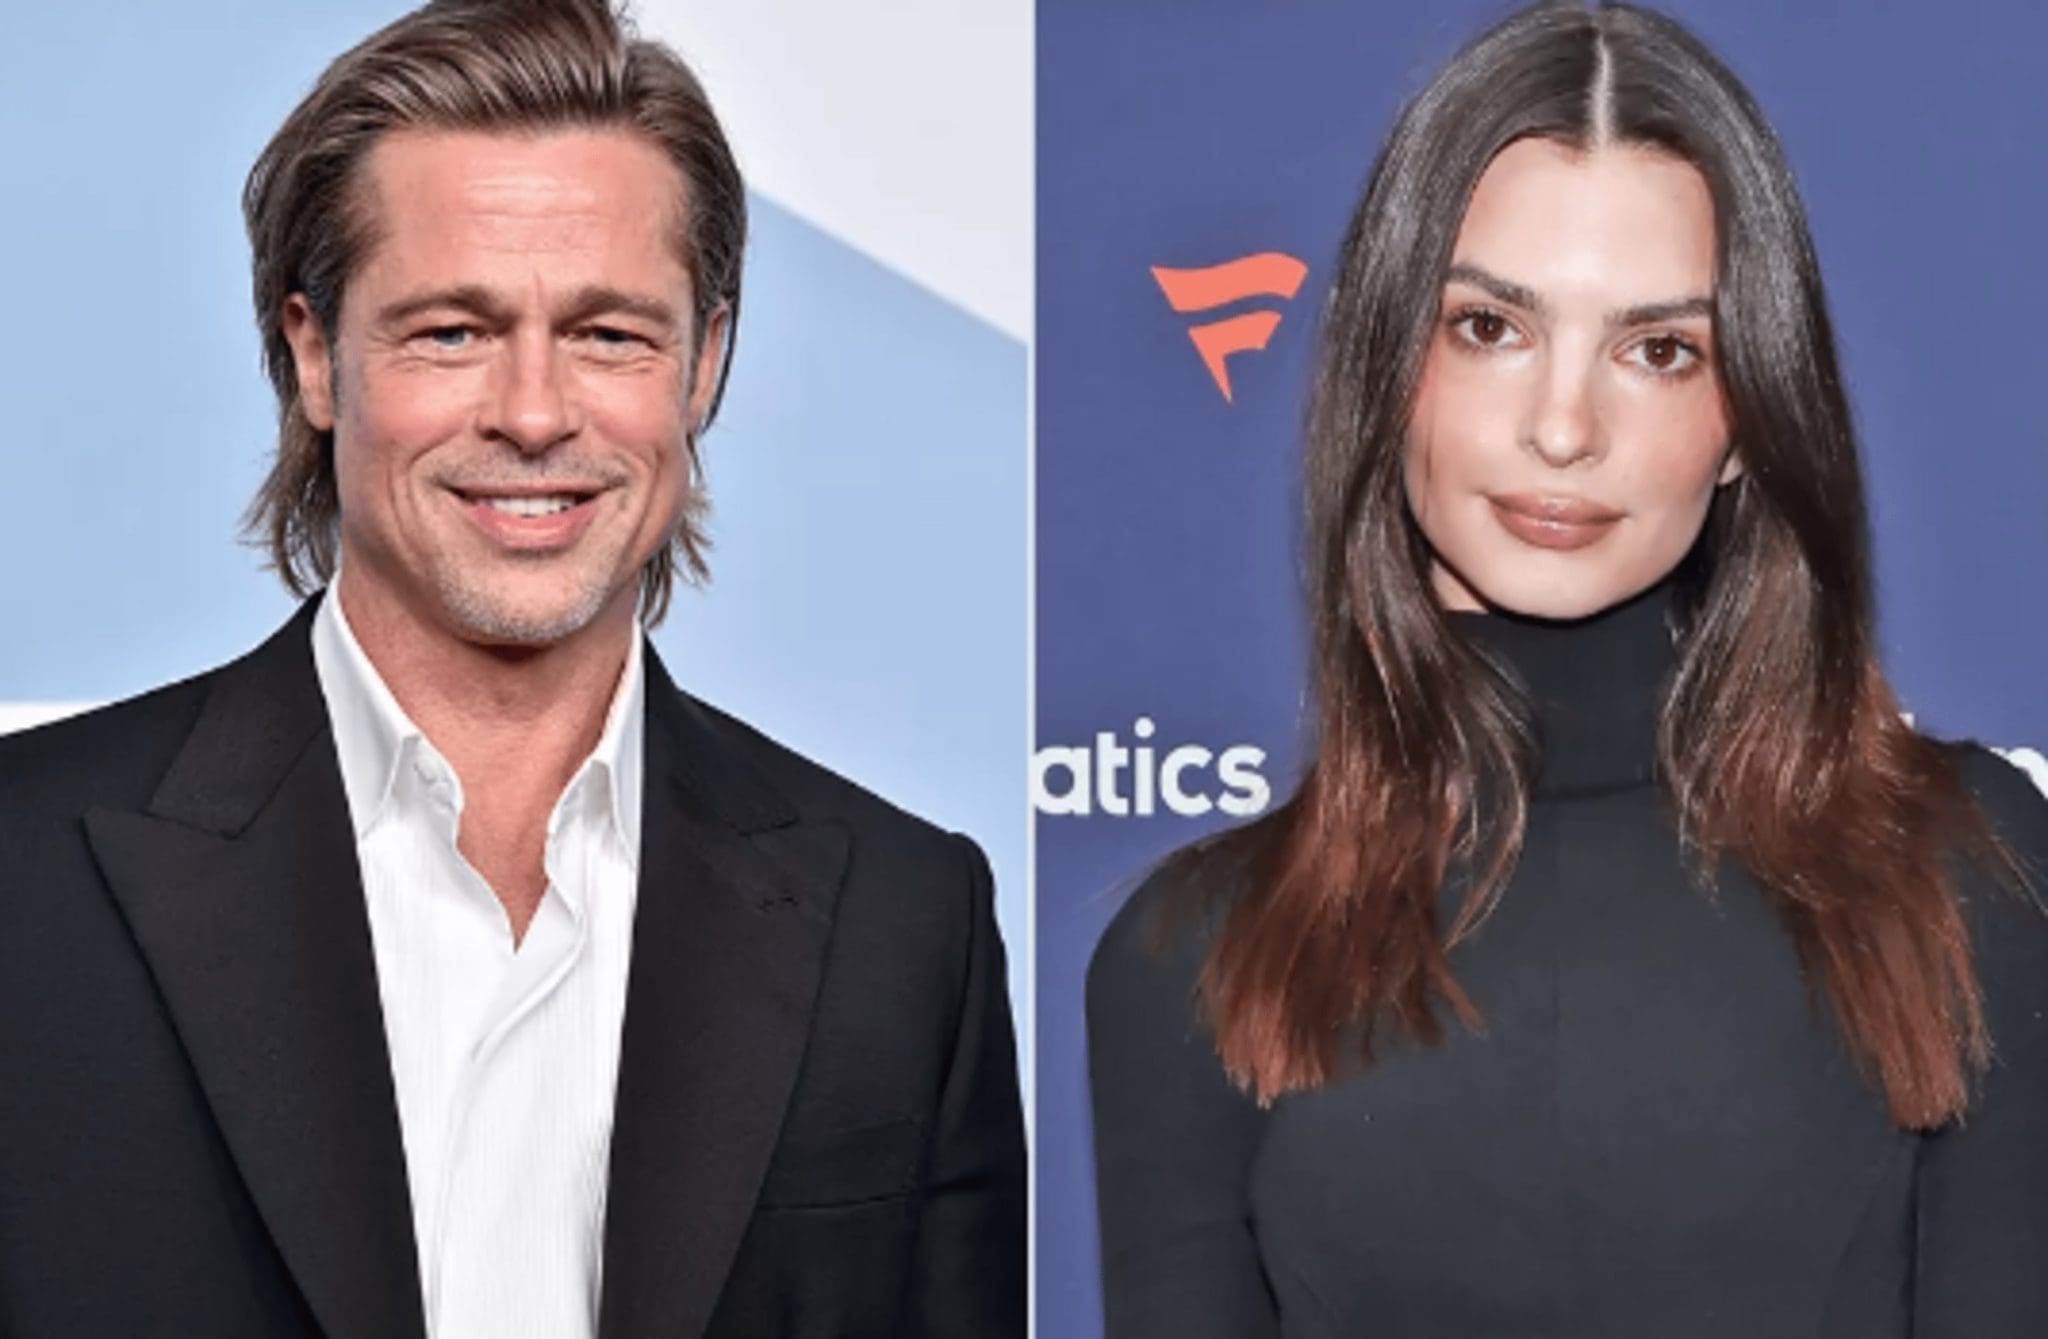 Brad Pitt and Emily Ratajkowski have been seen together quite frequently.